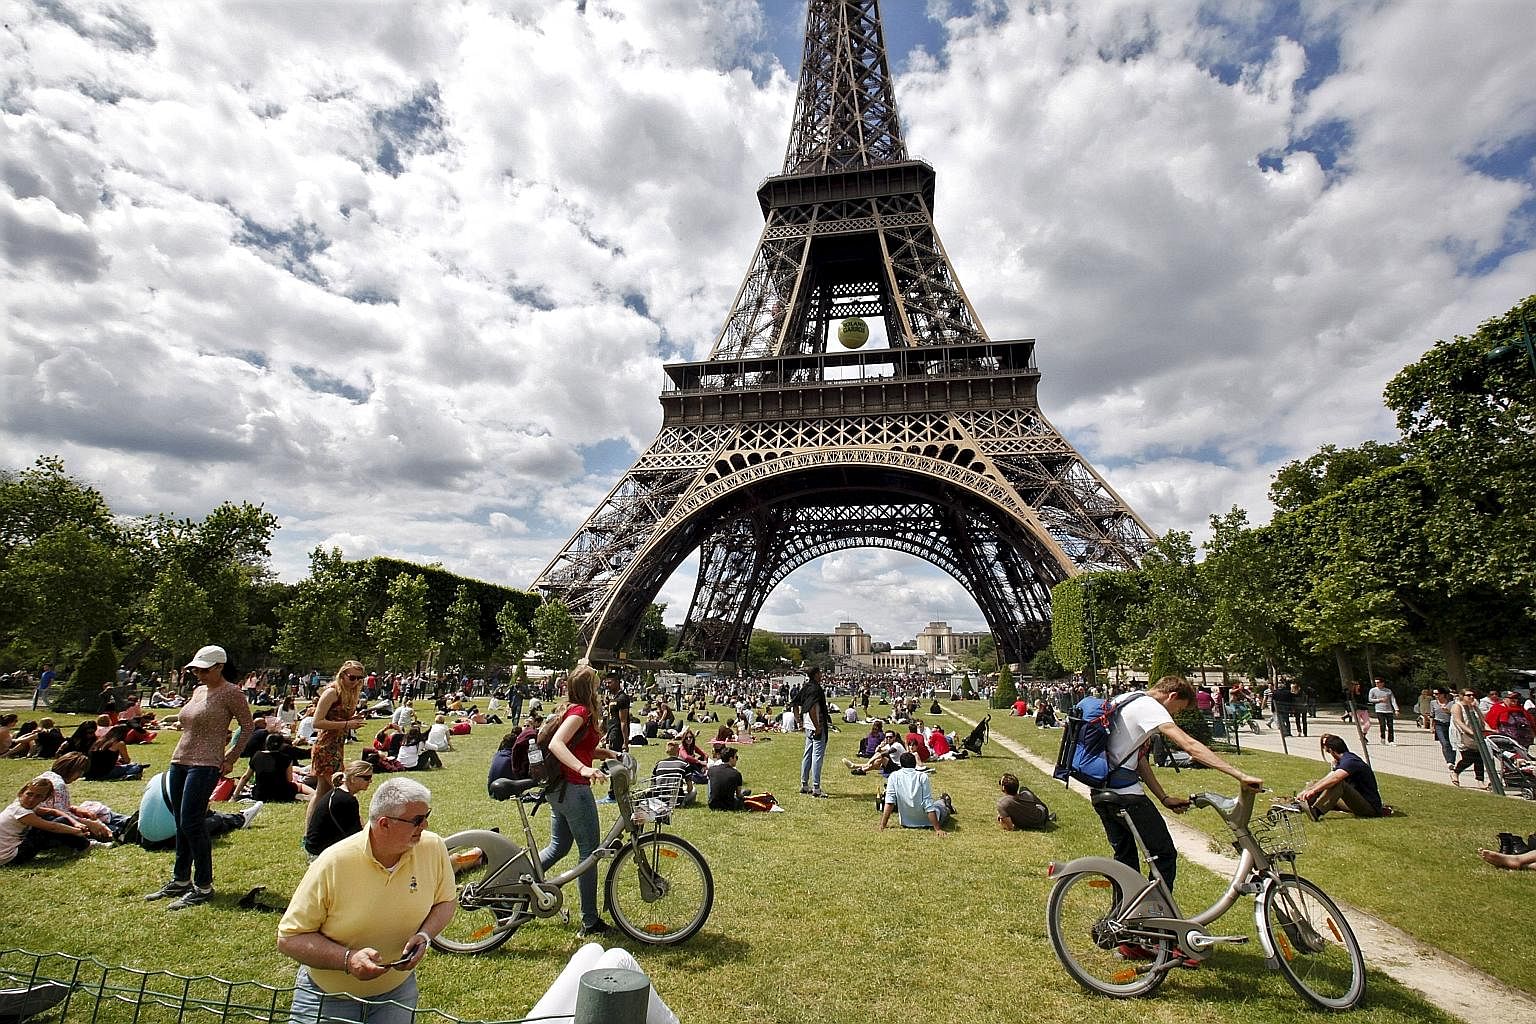 The Eiffel Tower (above) in Paris draws seven million visitors each year. Tourists, while contributing to the world's local economies, are overcrowding them as well. So much so that there has been a backlash against tourism in many cities, including 